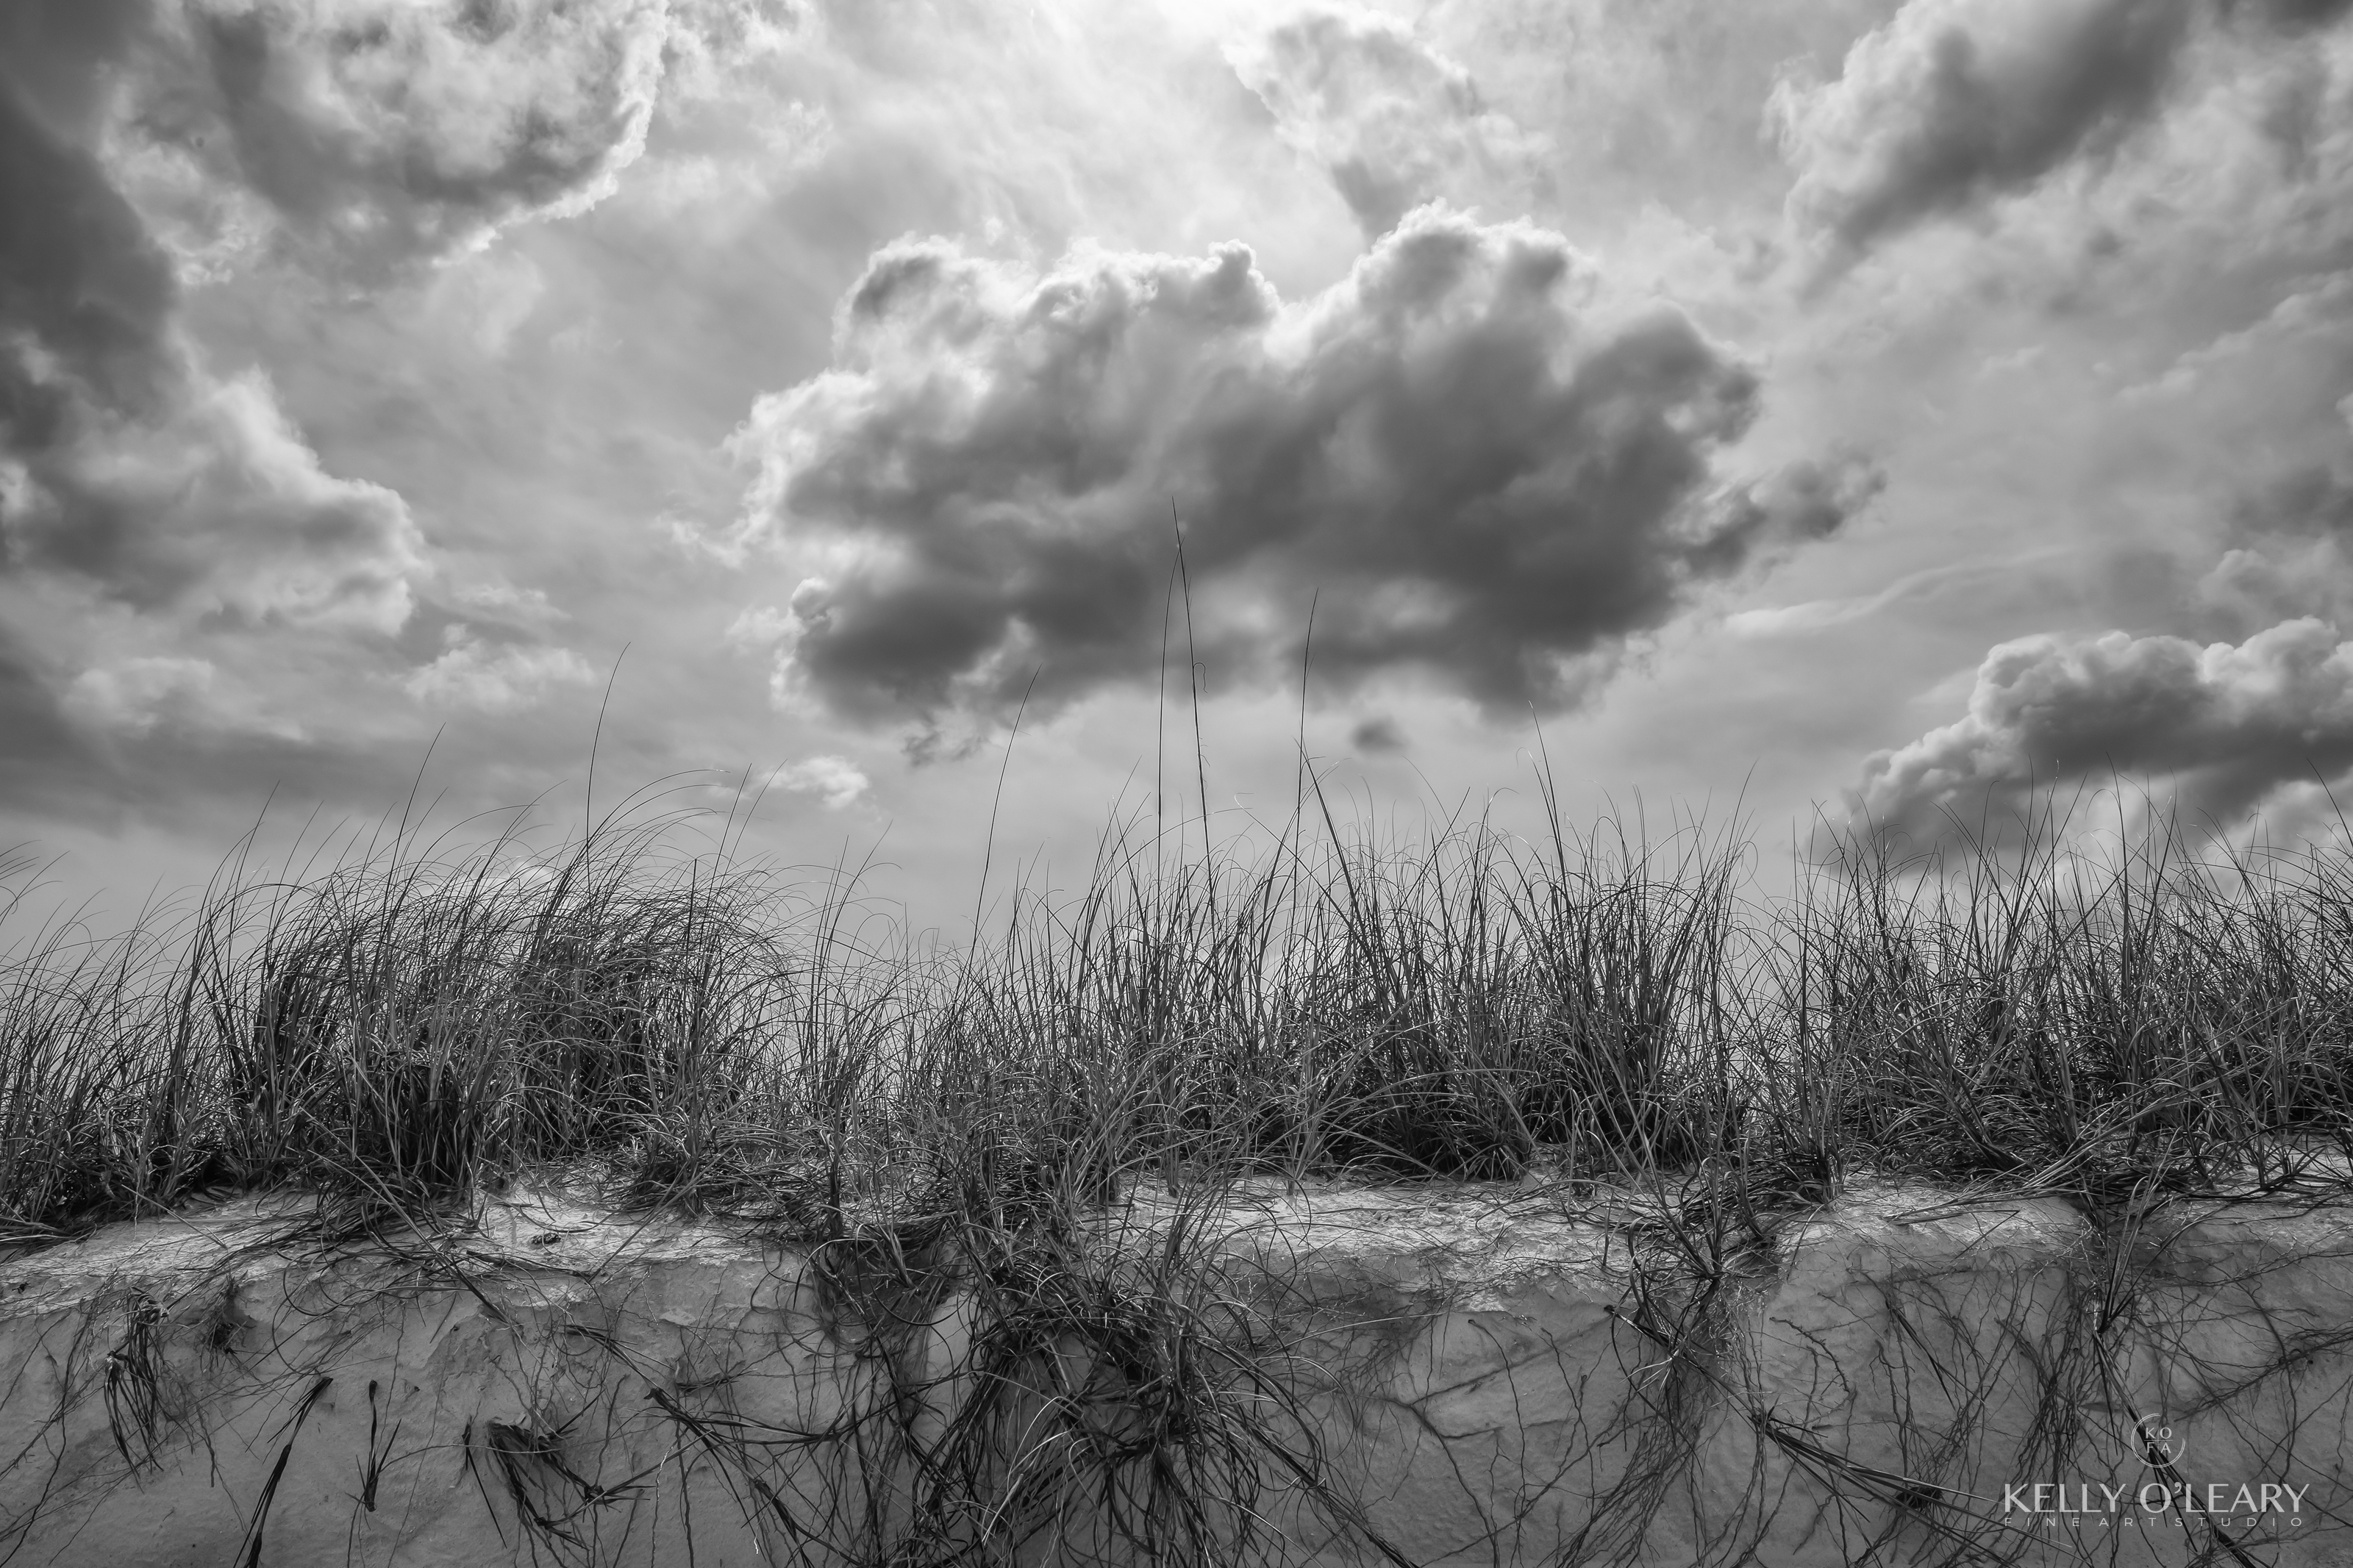 A black and white image titled Stage Lighting photographed by Kelly O'Leary of a backlit cloud over a grassy beach bank. | Photo Title: Stage Lighting | 
        Photo by  ©2022